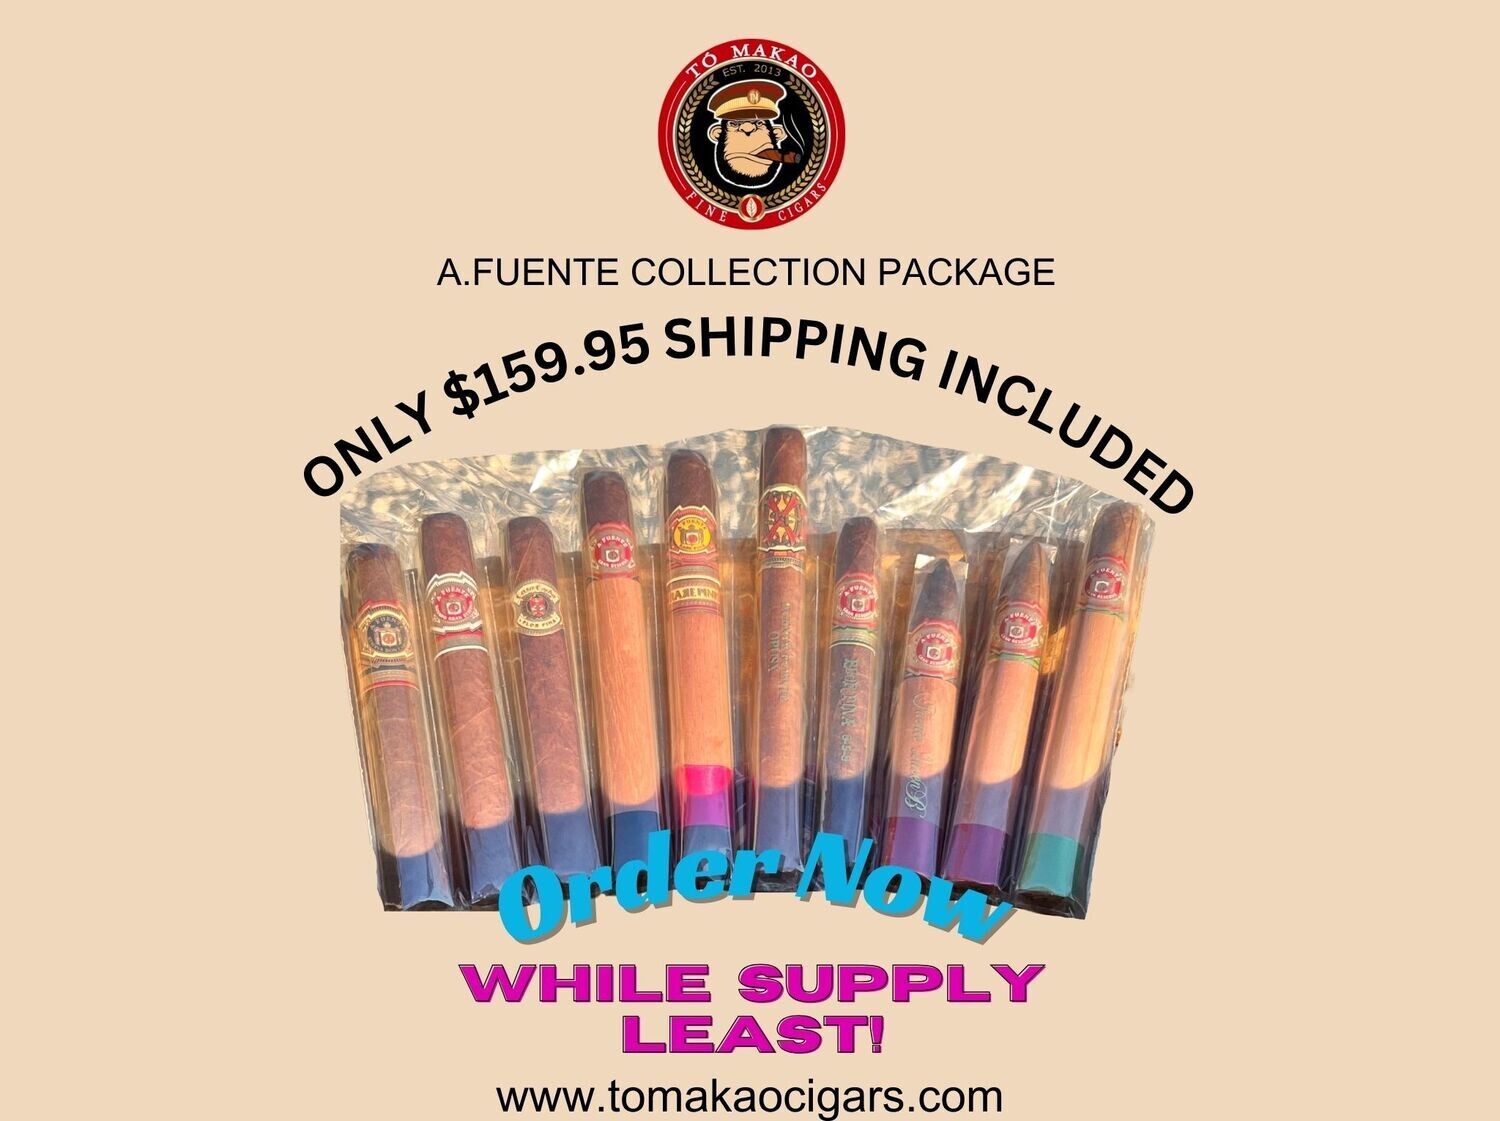 A. FUENTE COLLECTION PACKAGE